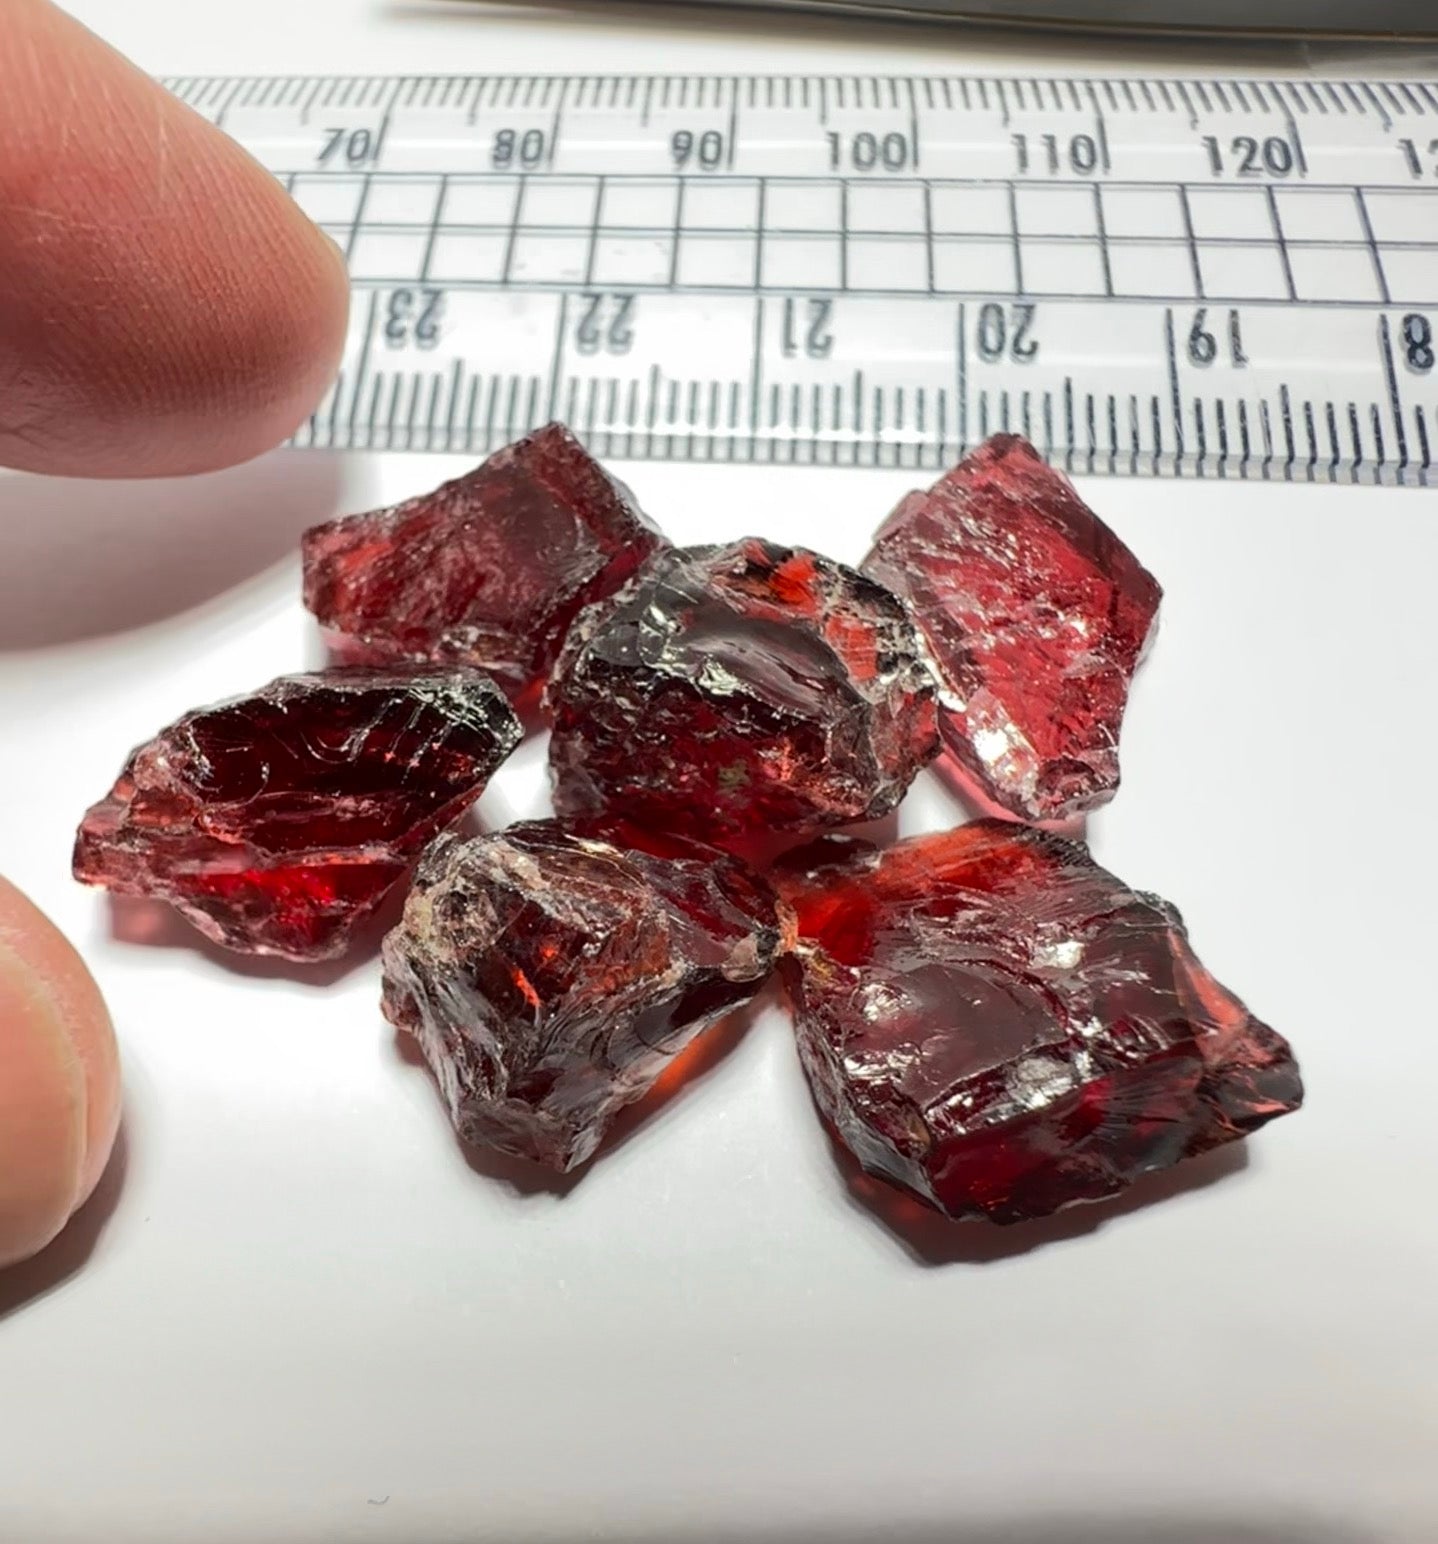 86.12Ct Red Garnet Lot 11.19Ct - 16.13Ct Clean With Slight Inclusions On The Outside